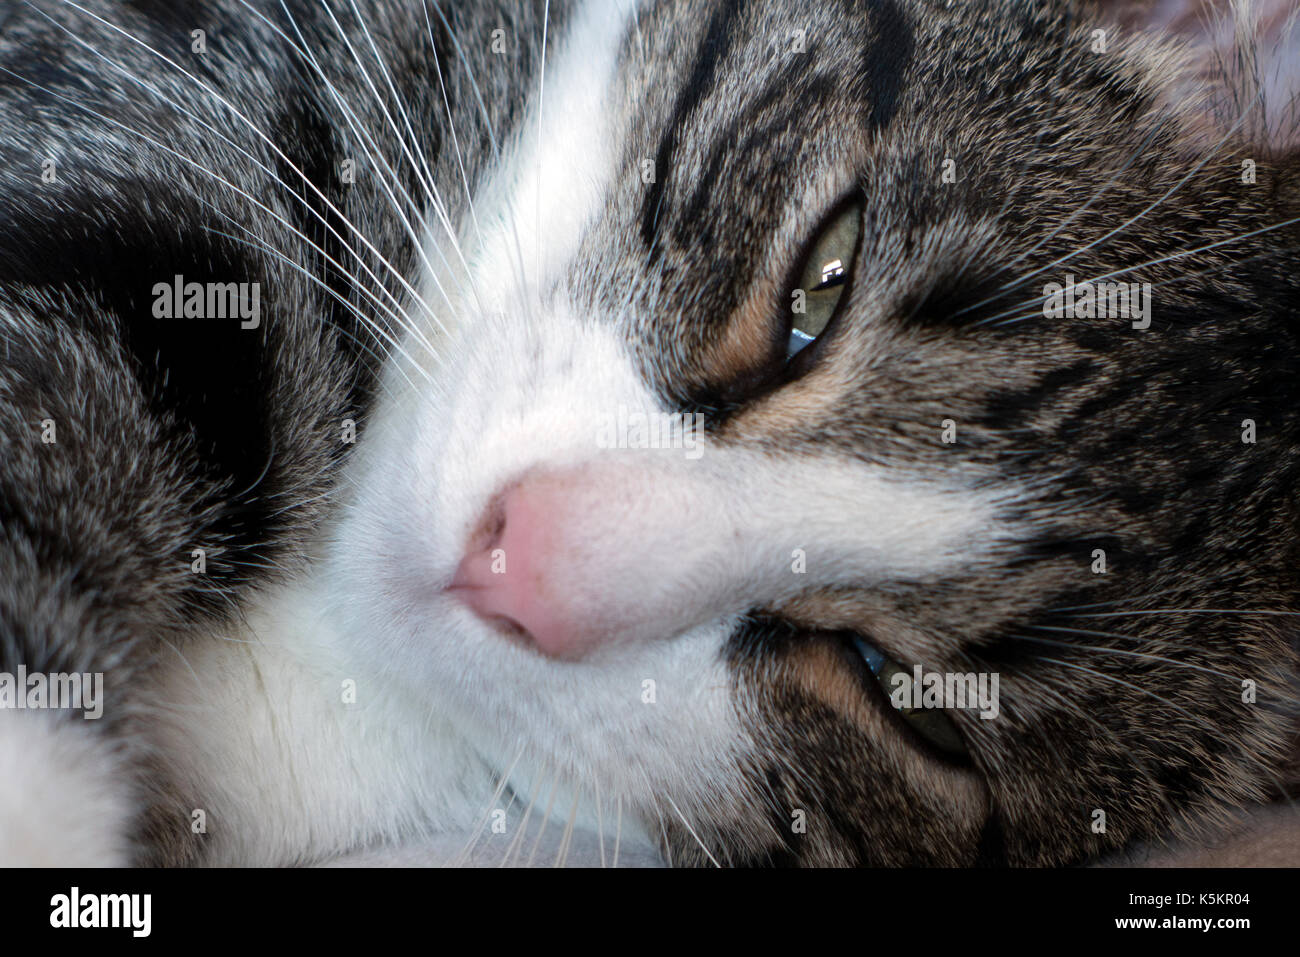 Grey and white cat napping. Stock Photo